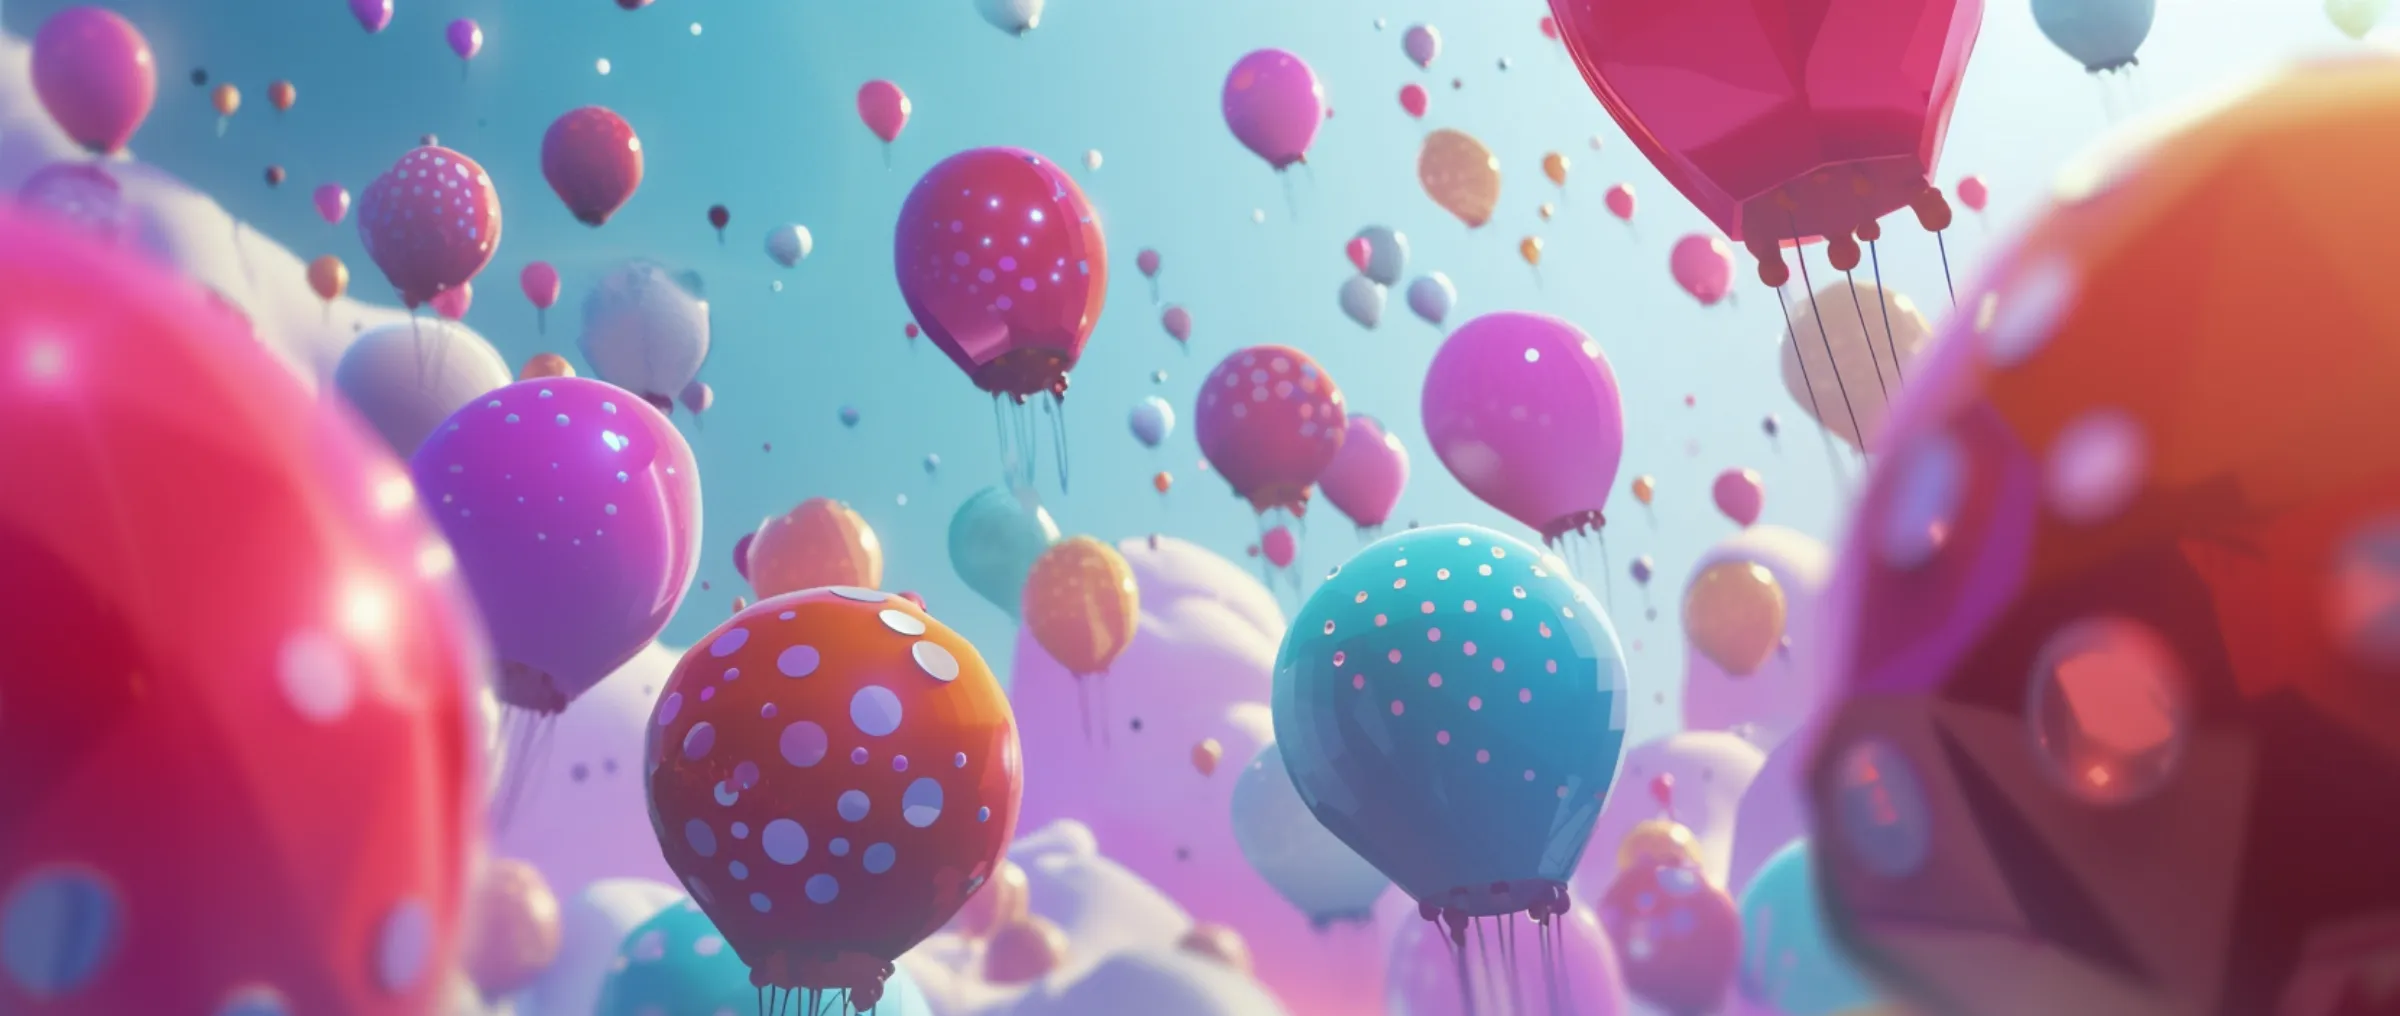 Altcoin Daily Highlights the Best Parachains of Polkadot